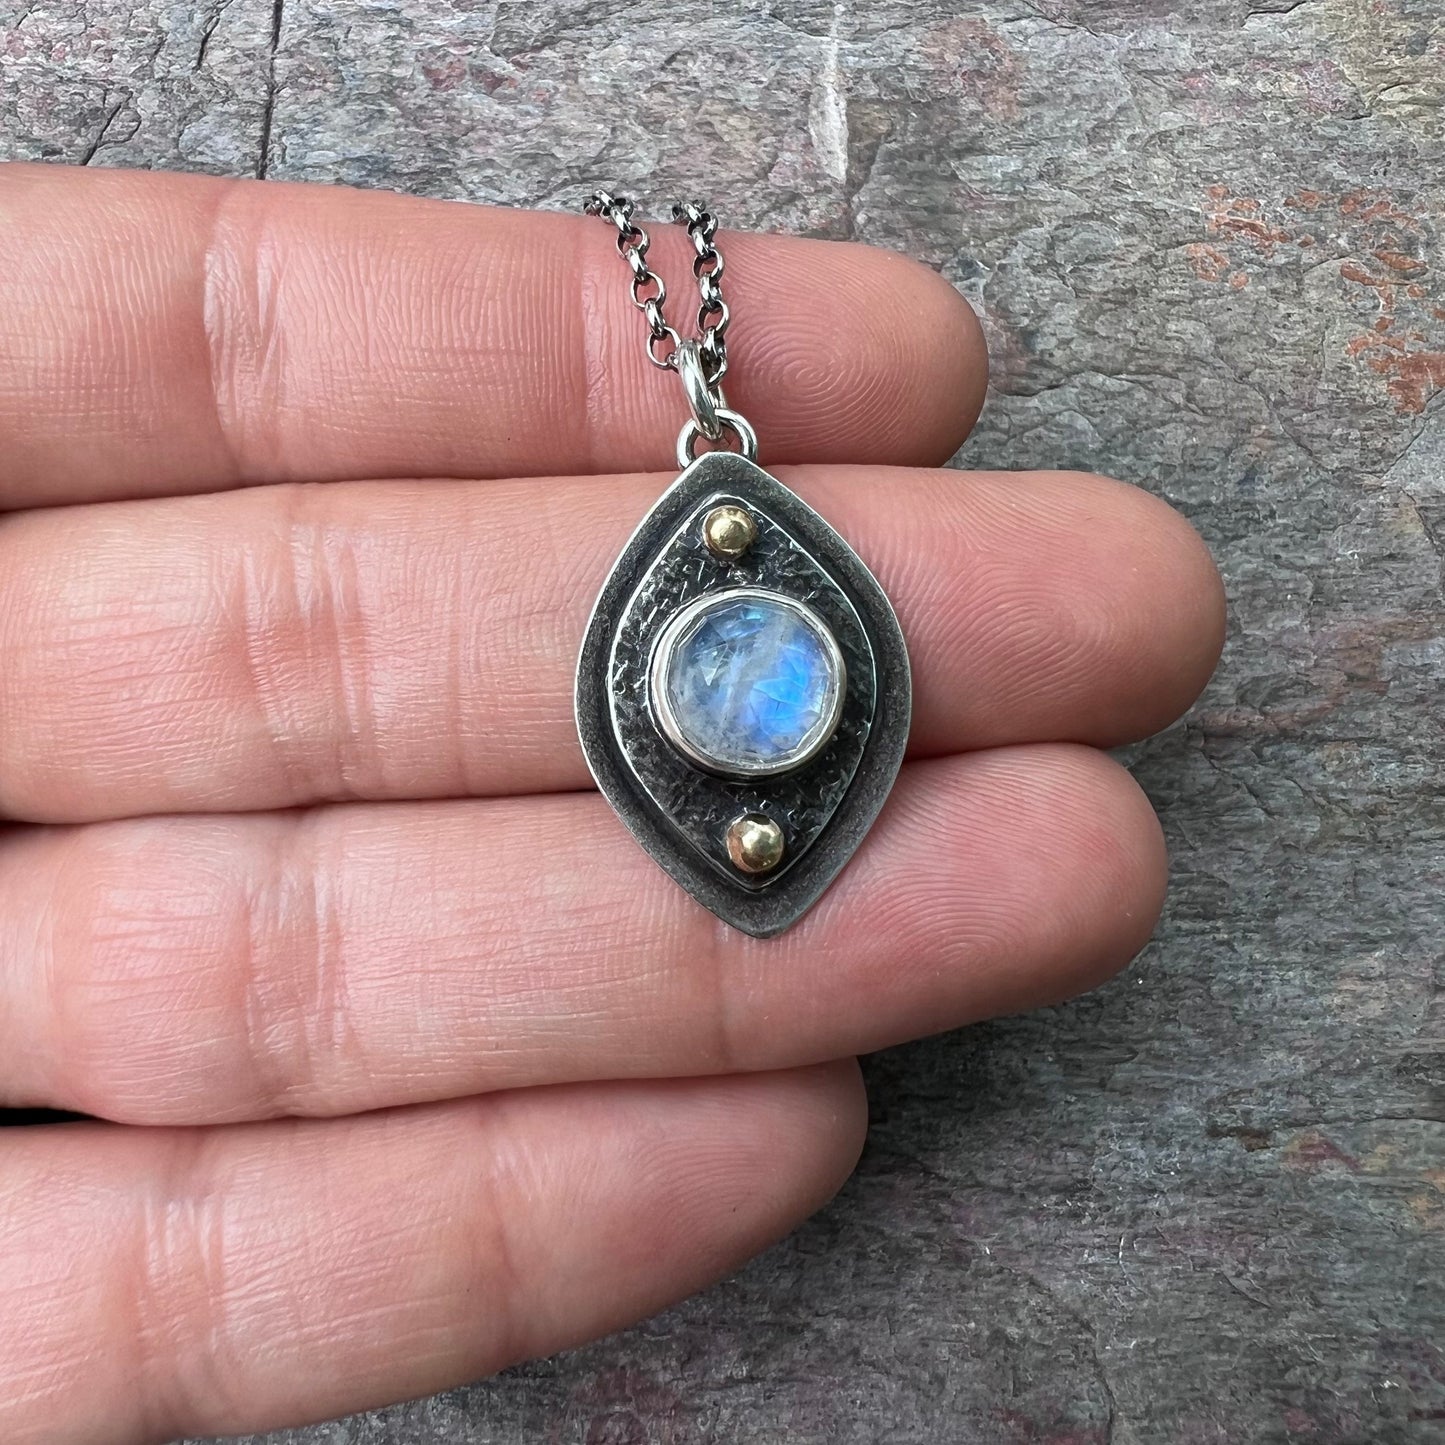 Rainbow Moonstone Sterling Silver Necklace - One-of-a-kind Rainbow Moonstone Pendant on Sterling Silver Chain